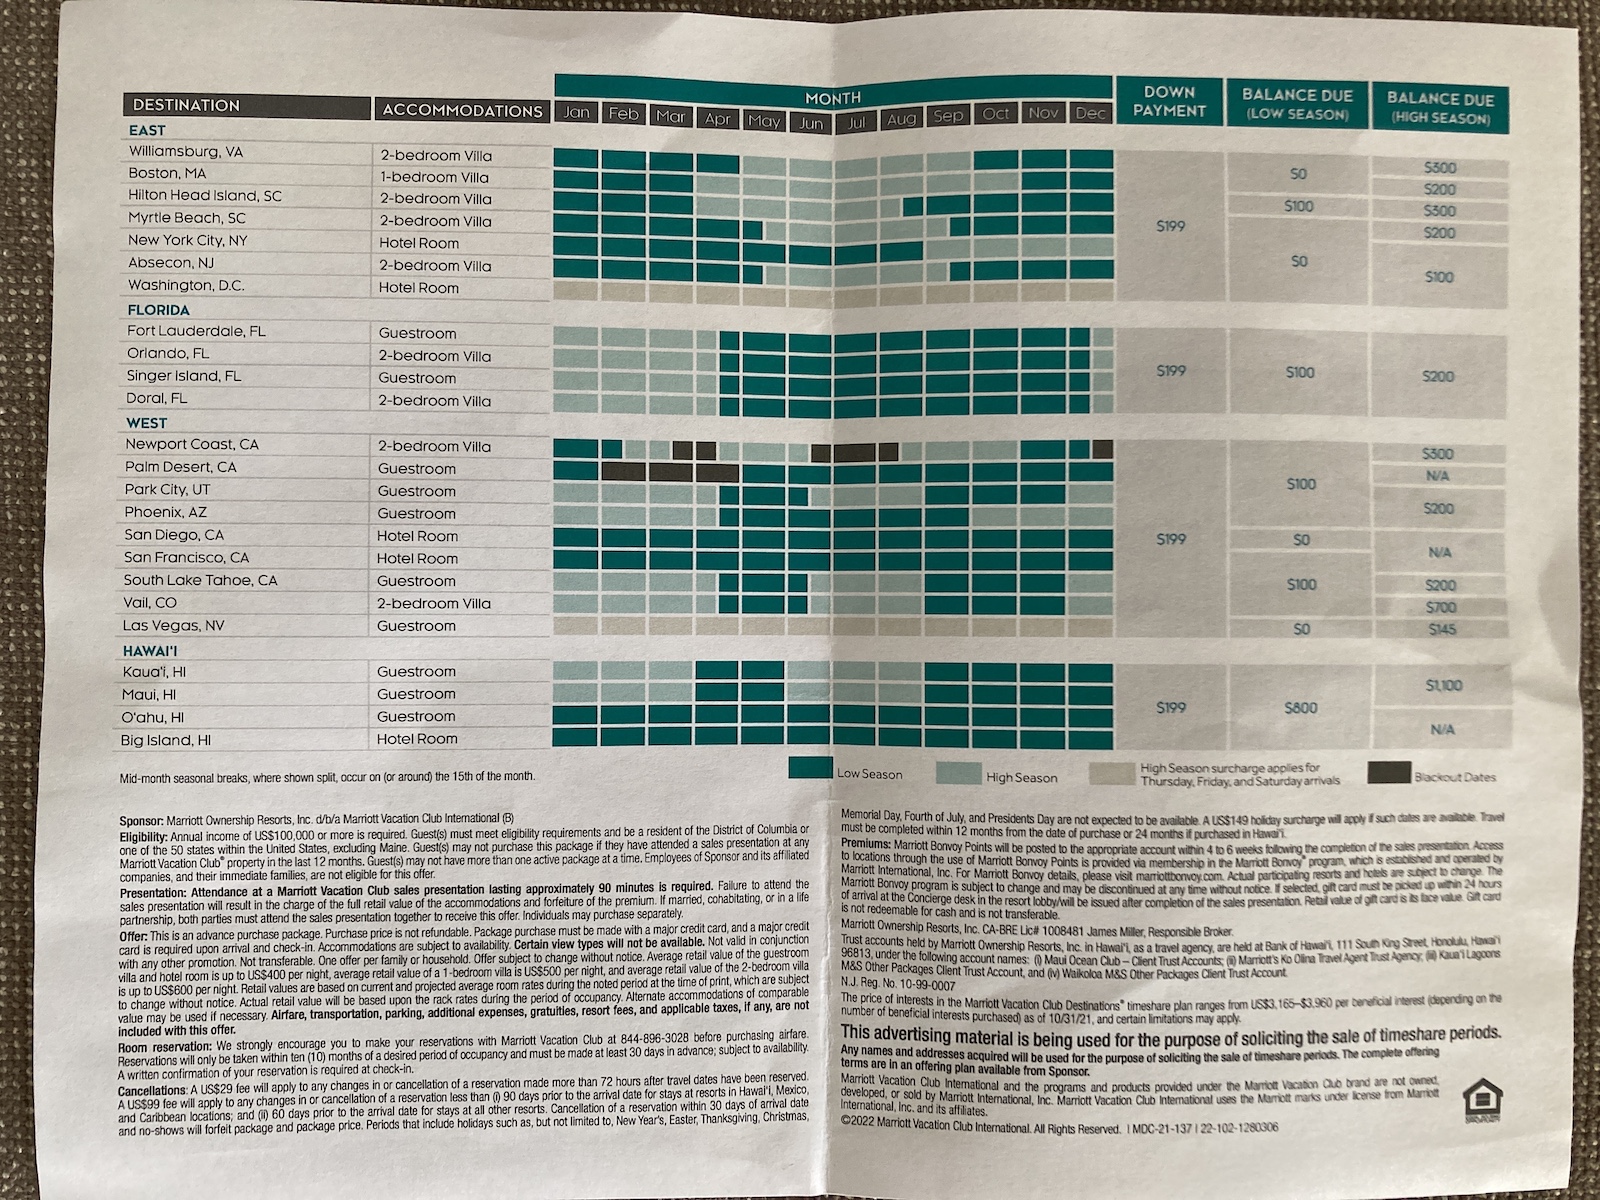 Marriott Vacation Club timeshare offer has higher fees for high season arrivals on the chart in this image